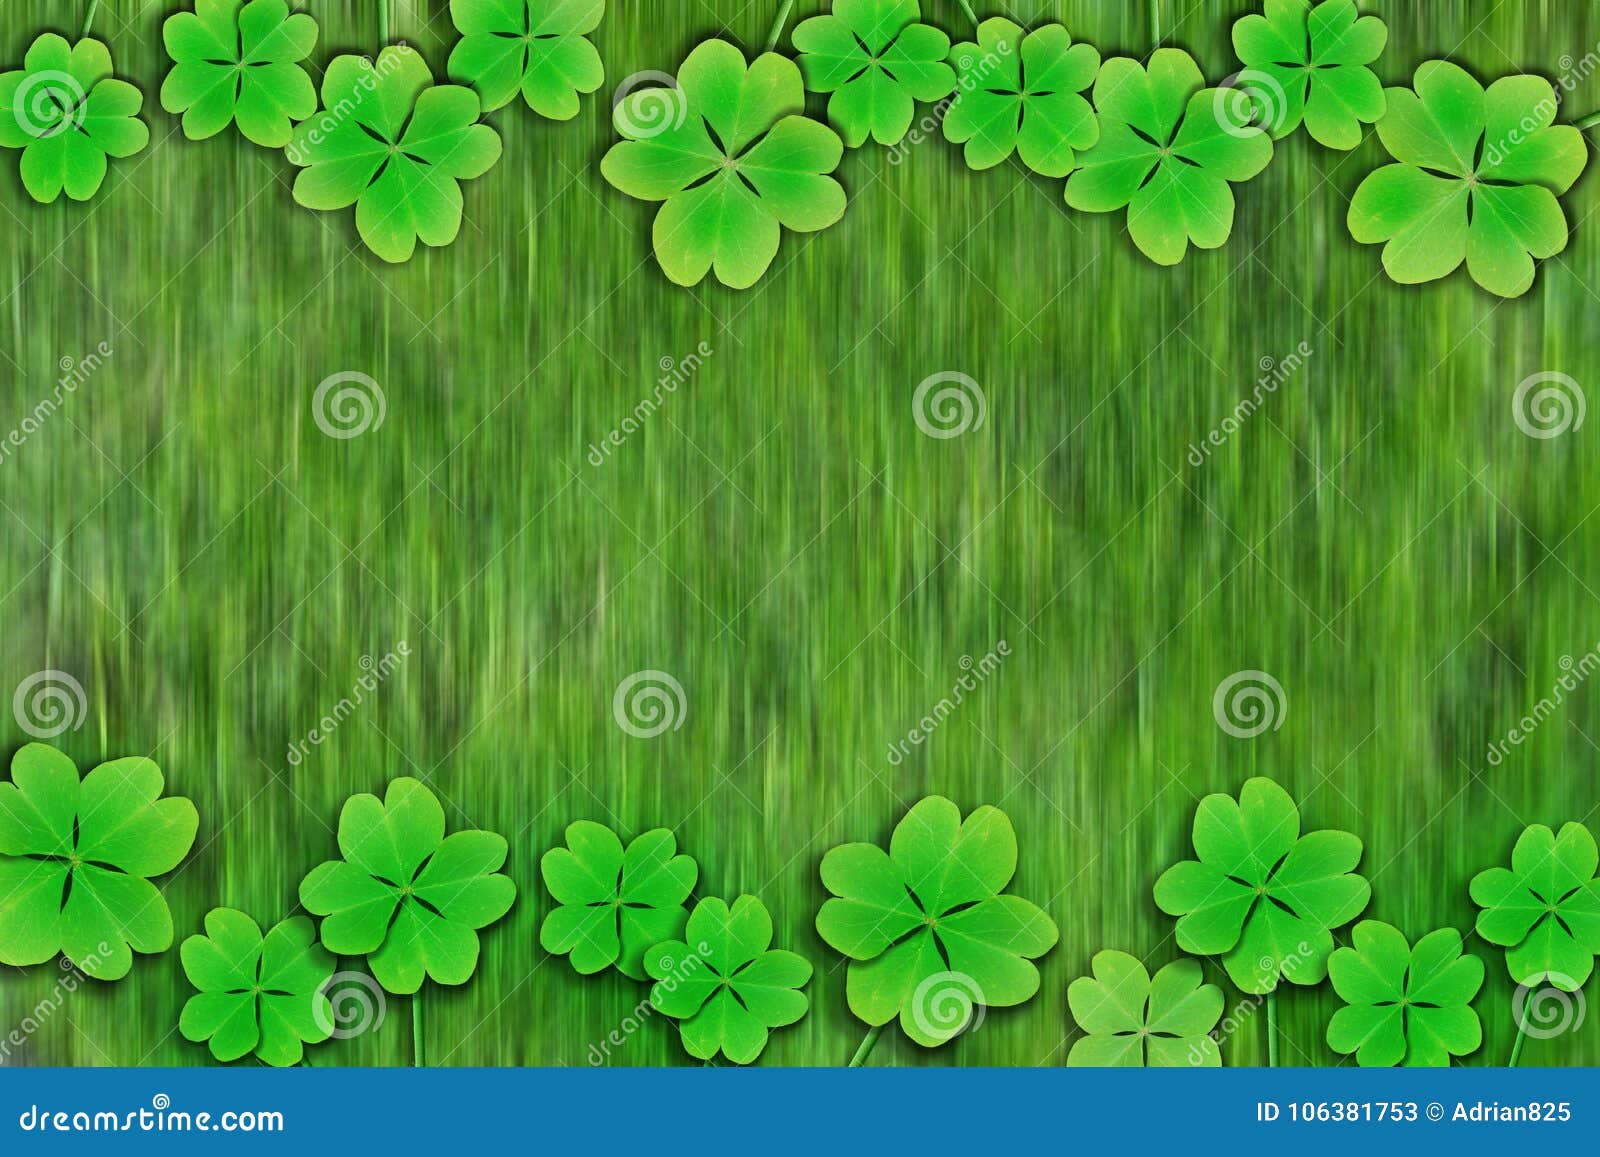 lucky four leaf clover natural background